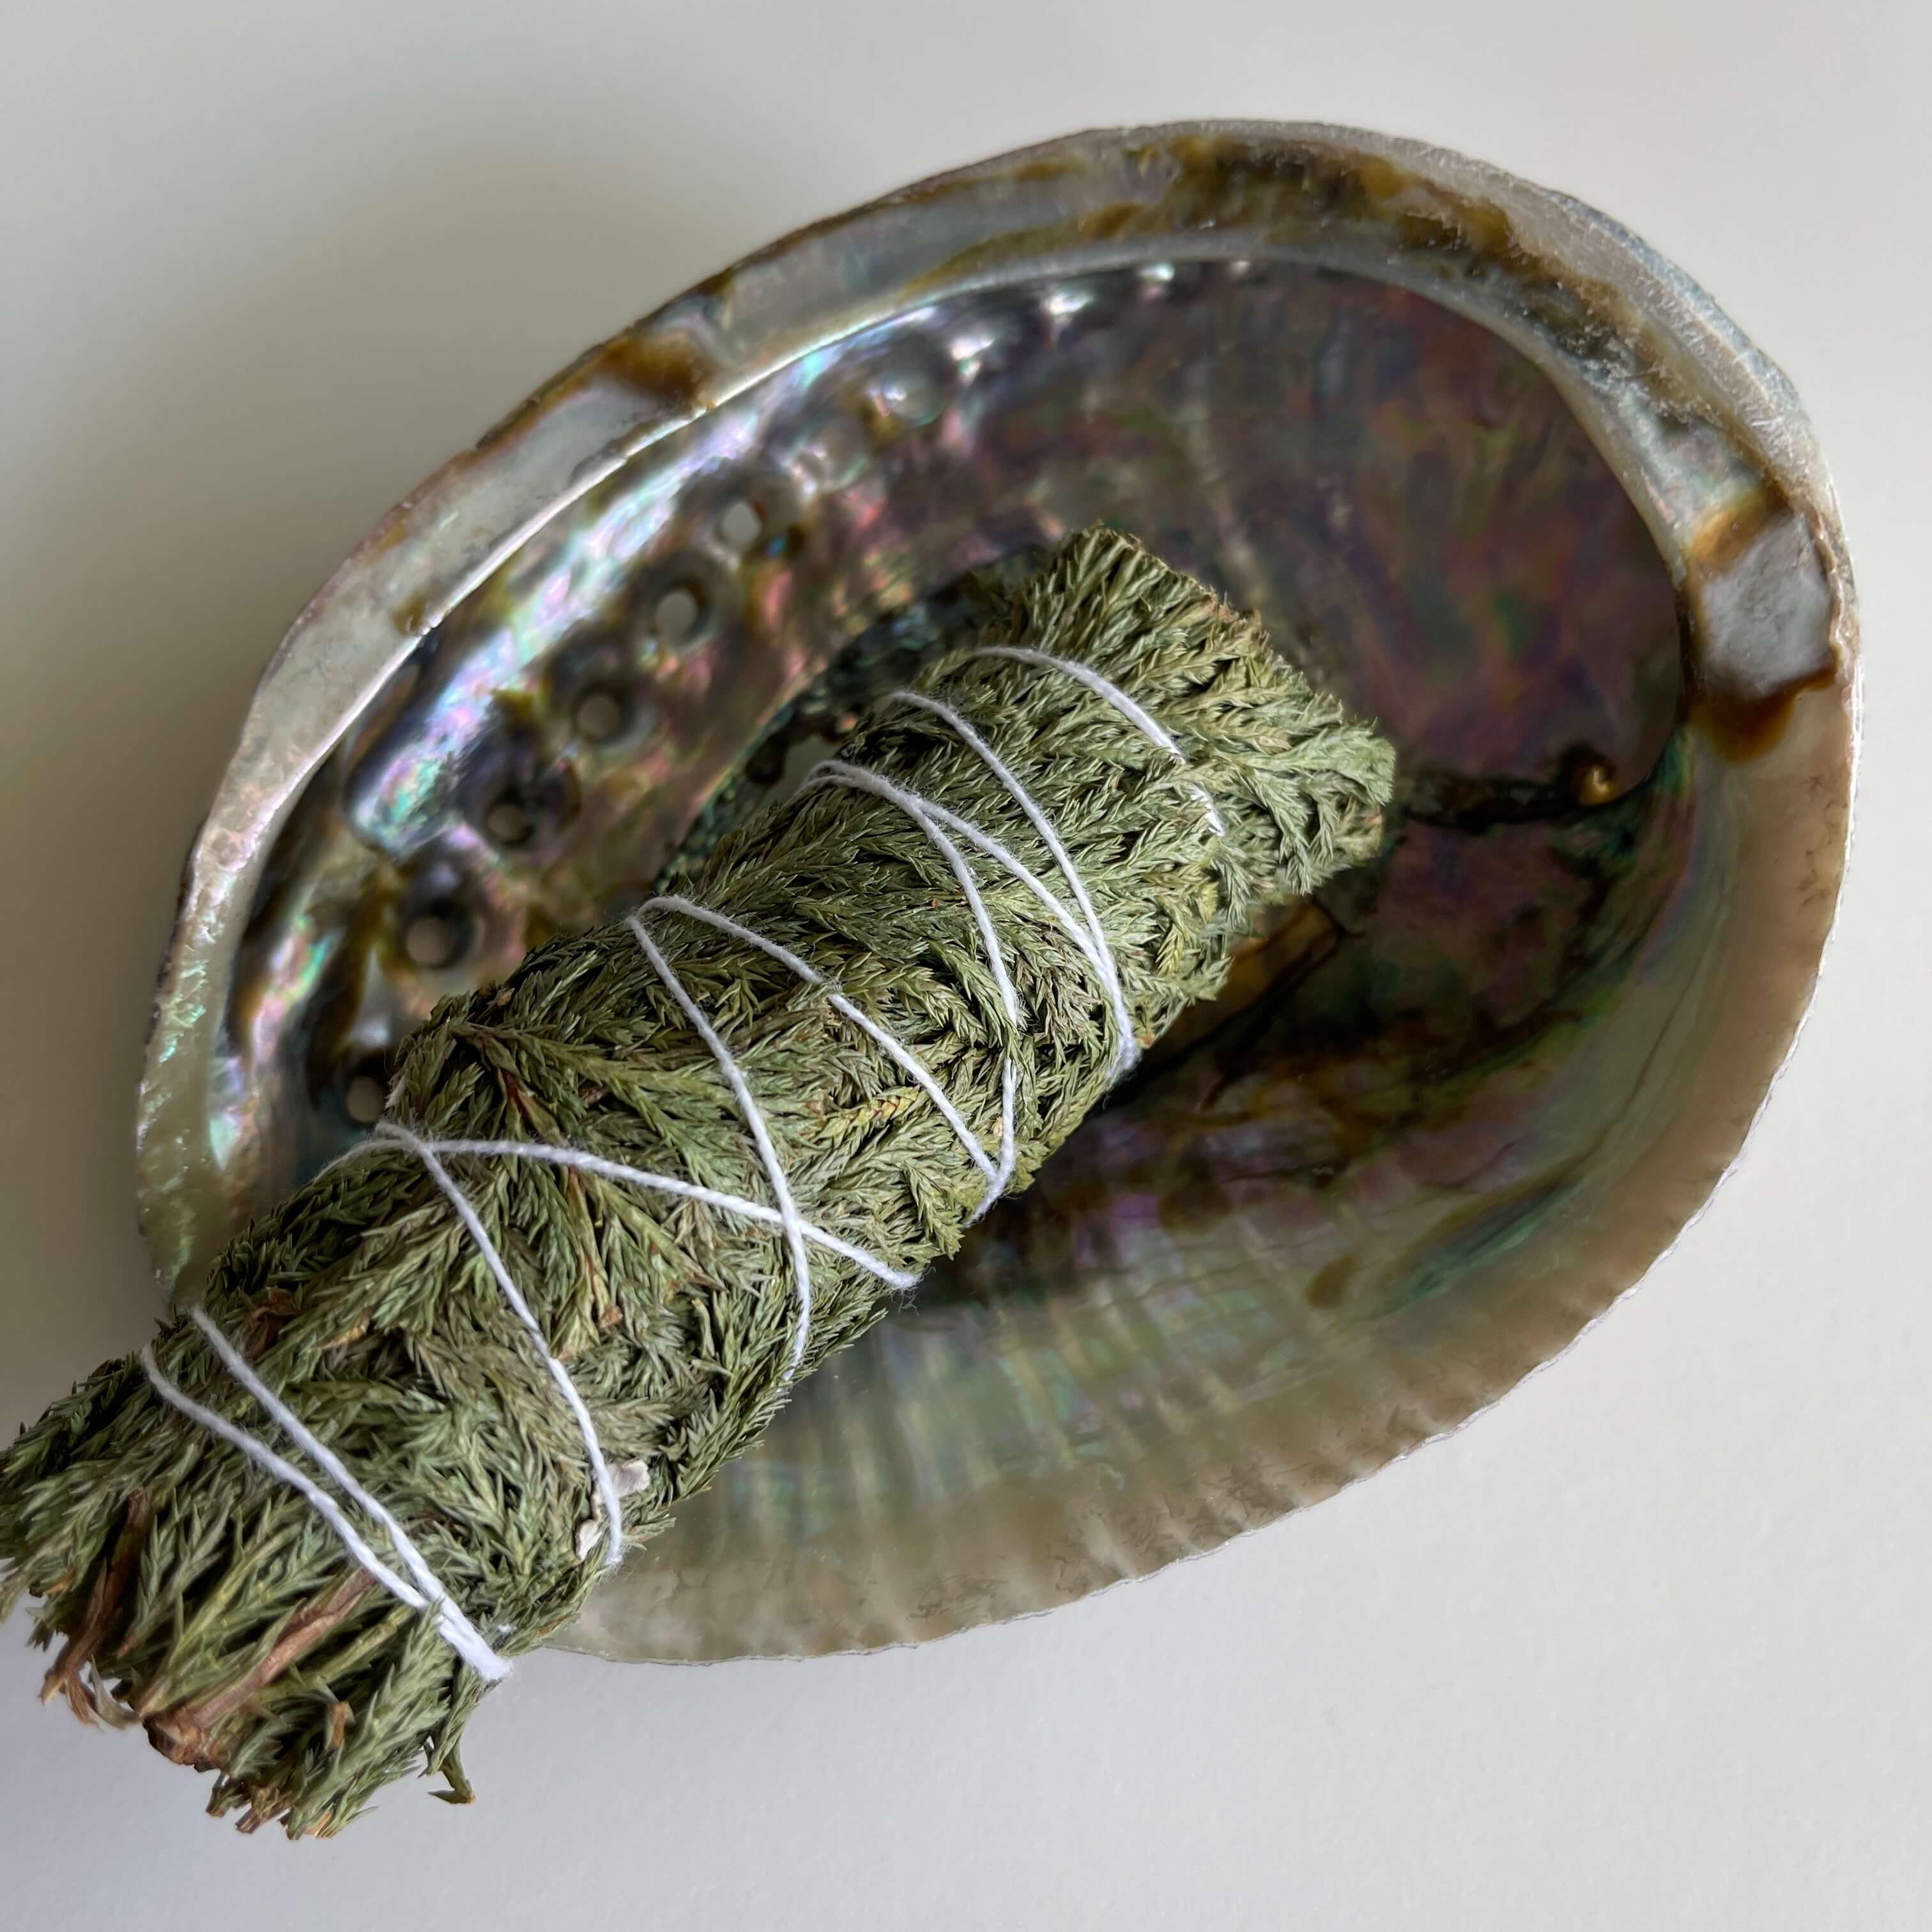  Cedar Smudge Stick in an Abalone Shell